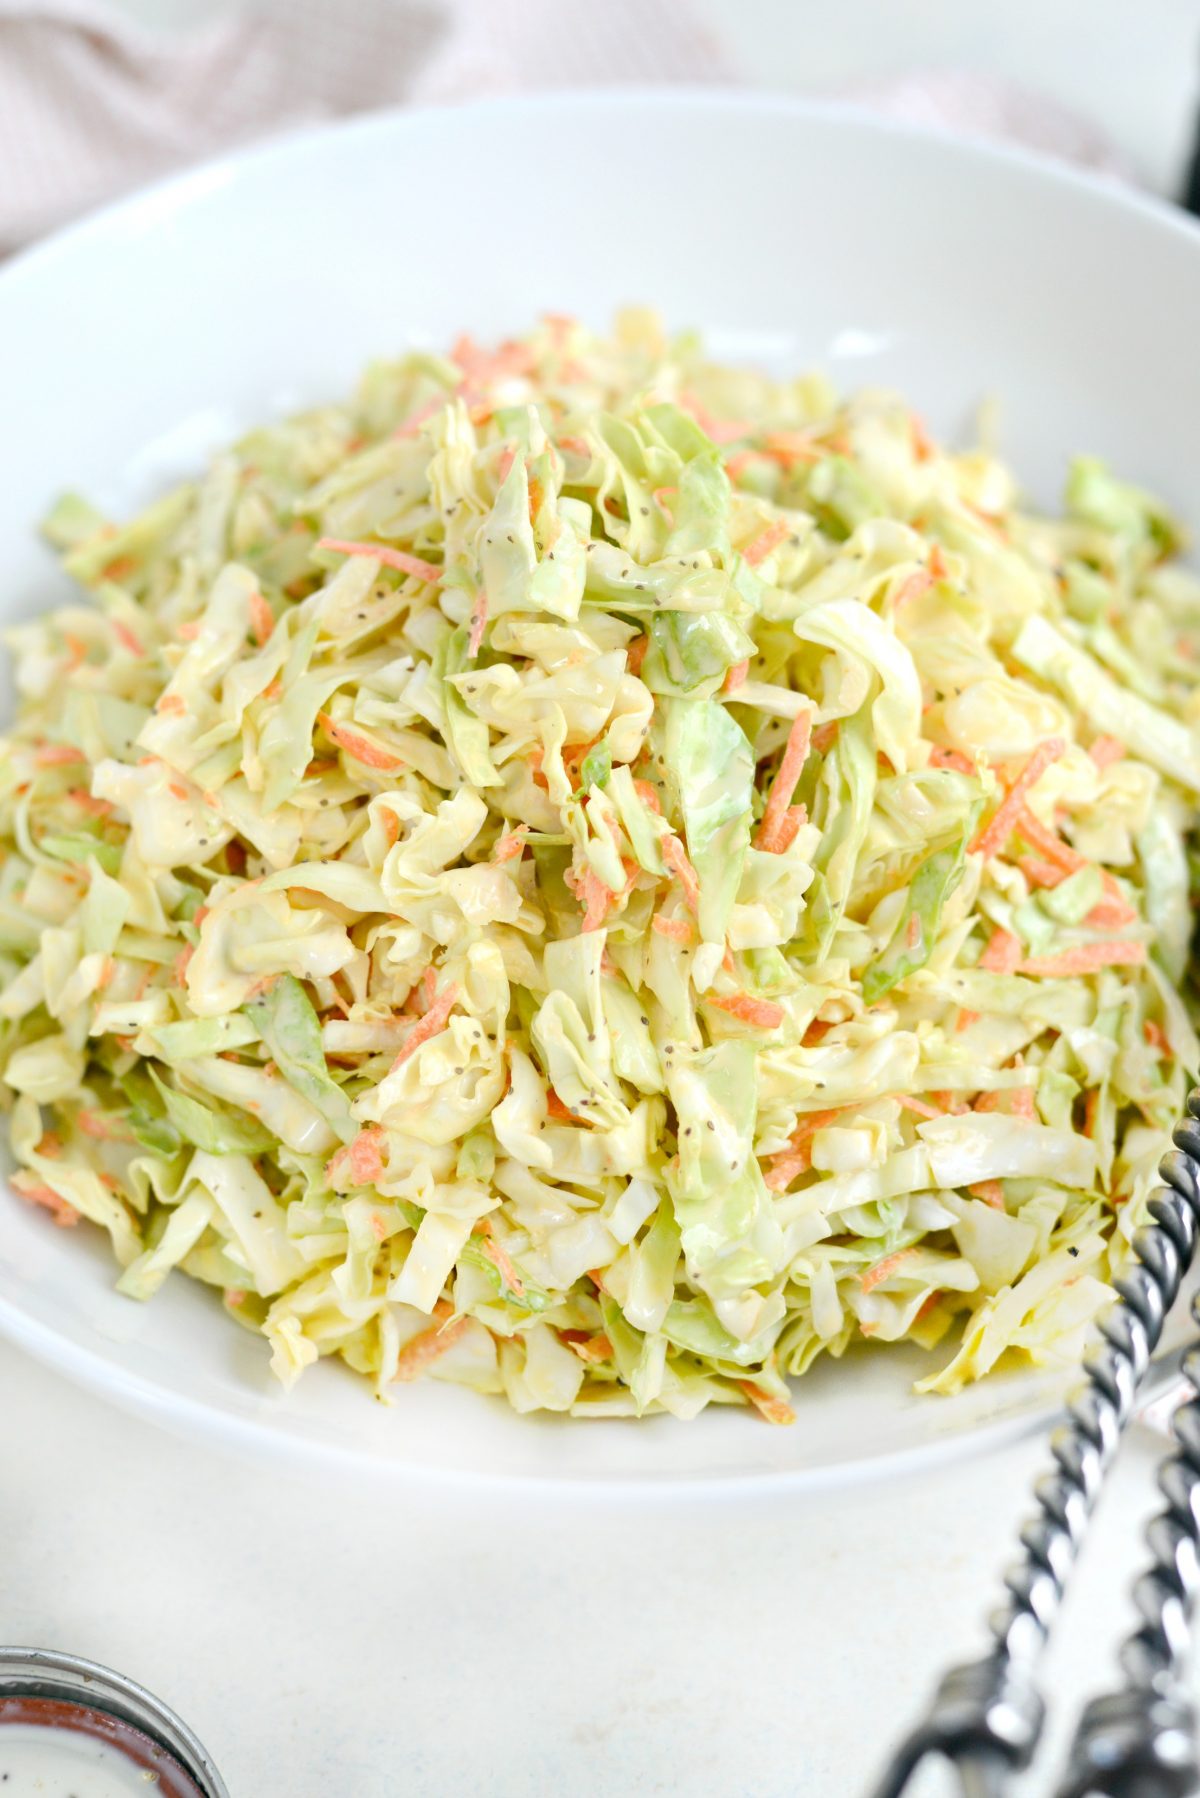 Classic Coleslaw Recipe with Homemade Dressing l SimplyScratch.com